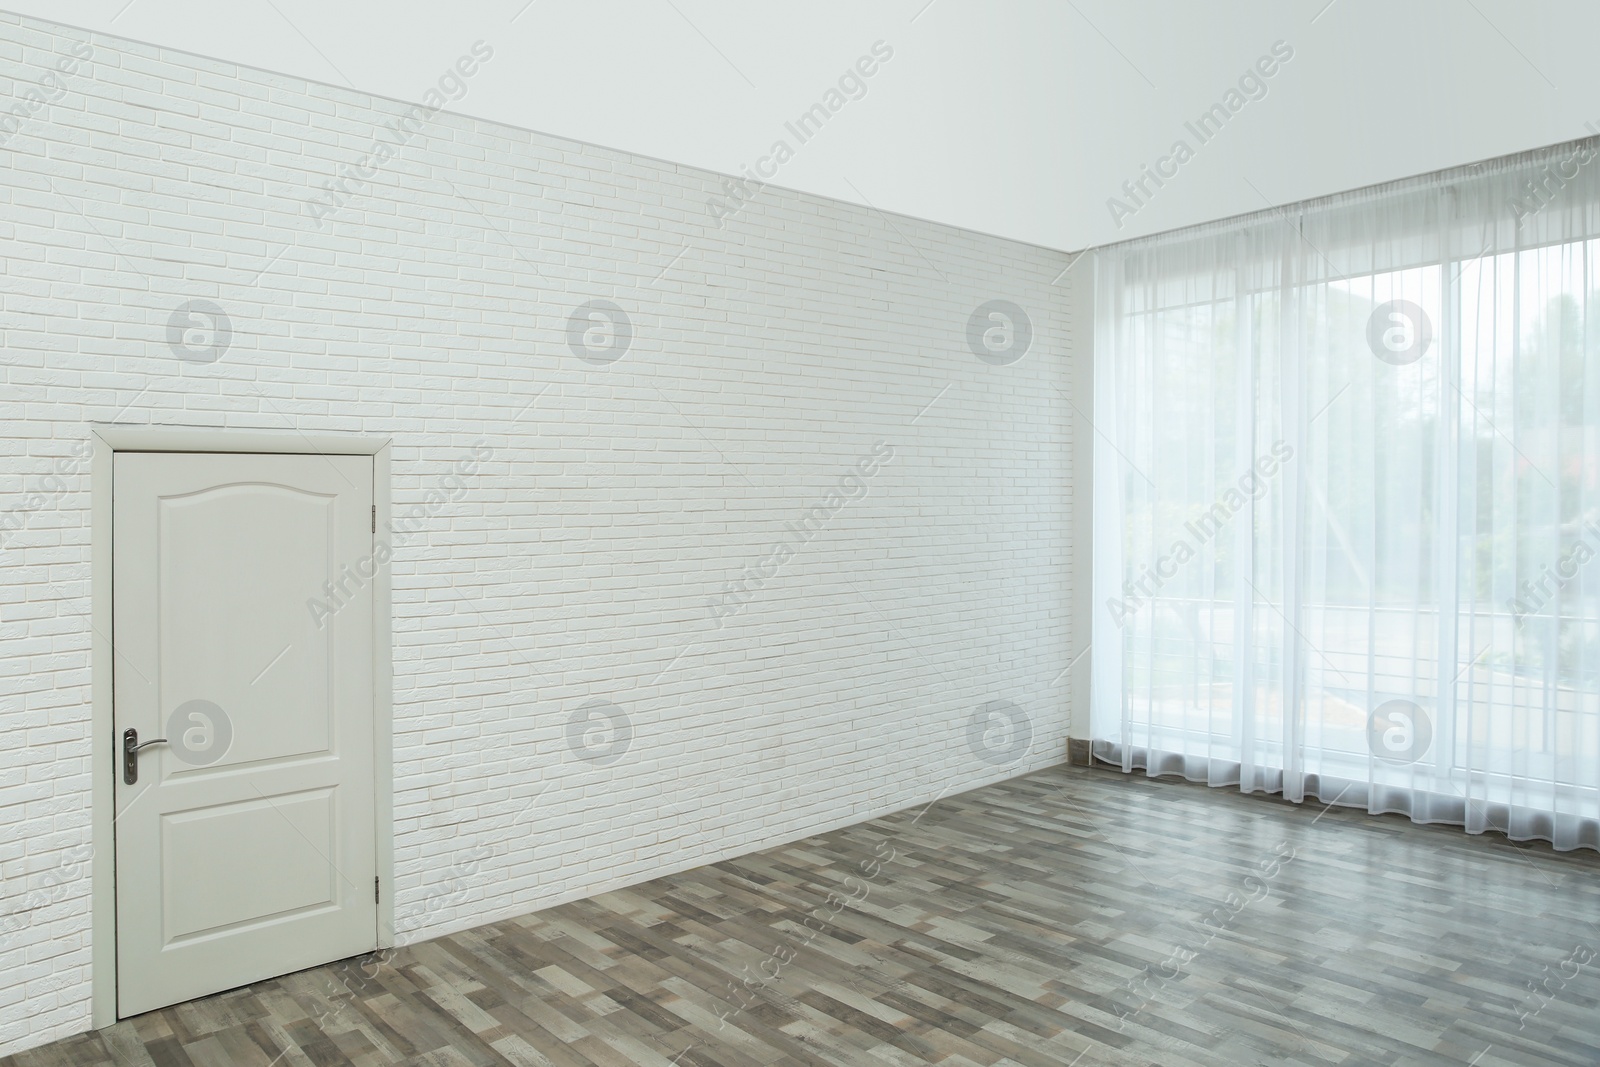 Photo of Empty room with brick wall, large window and white door